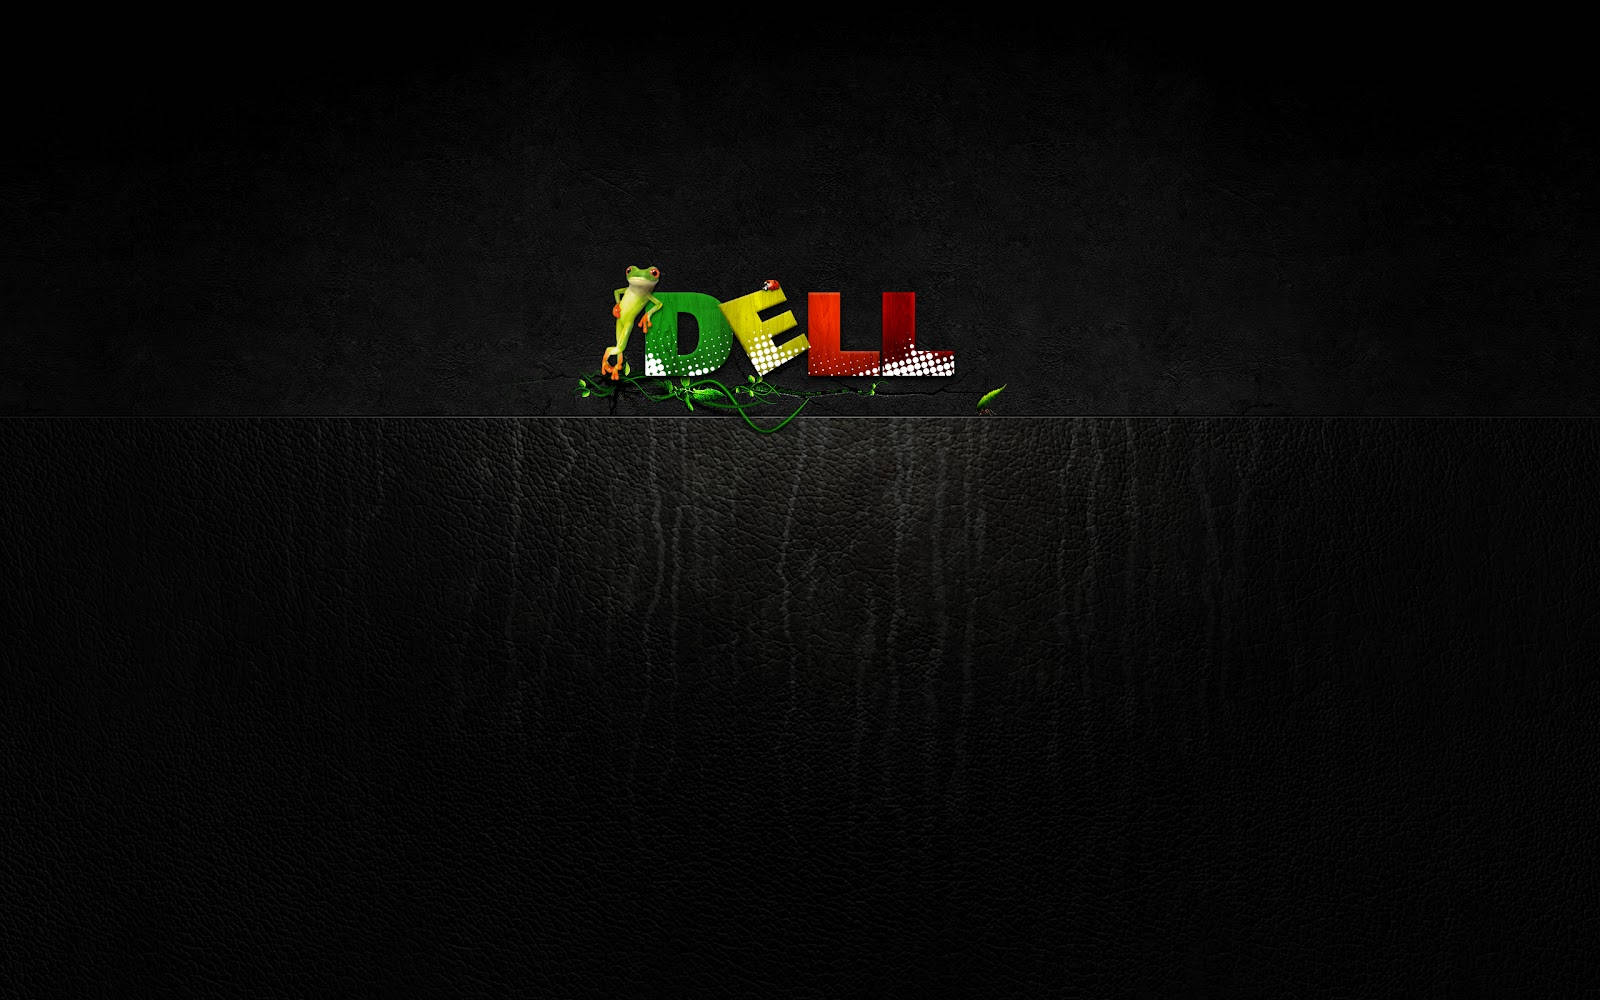 Dell Hd Logo With Frog Wallpaper